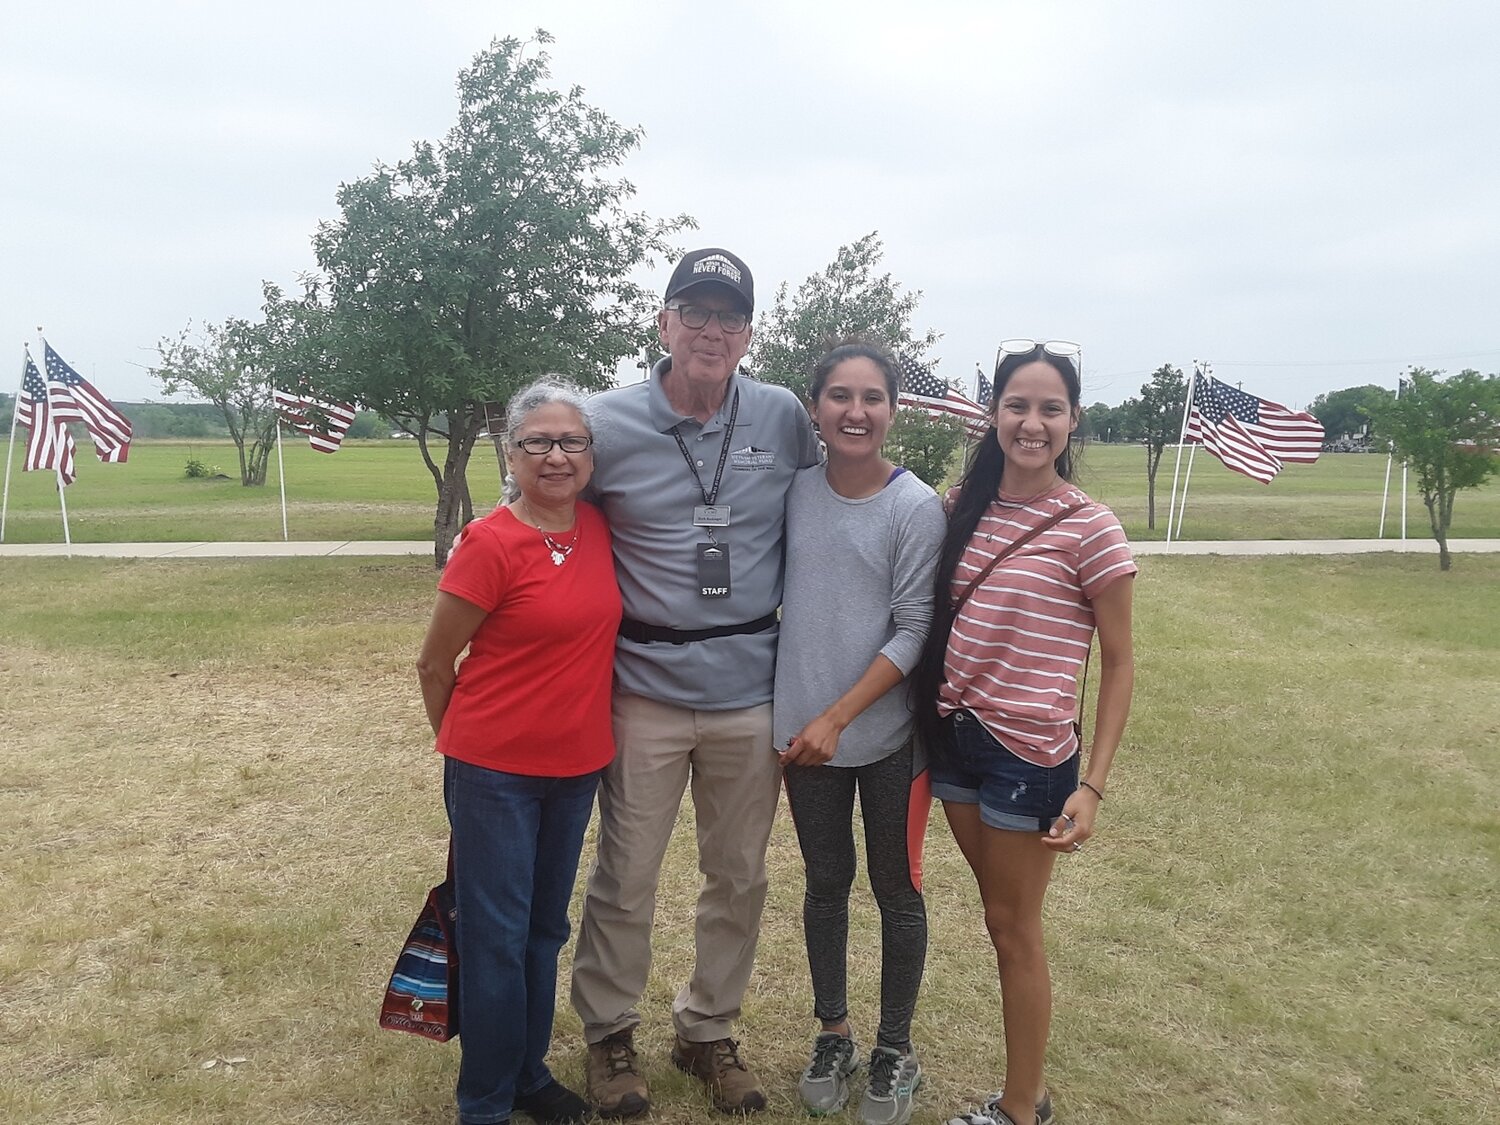 Herb Reckinger with fellow volunteers and visitors to a wall display in Kyle, Texas. The girls worked as volunteers at the wall with Reckinger, bringing their grandma when it was time to take the display down.